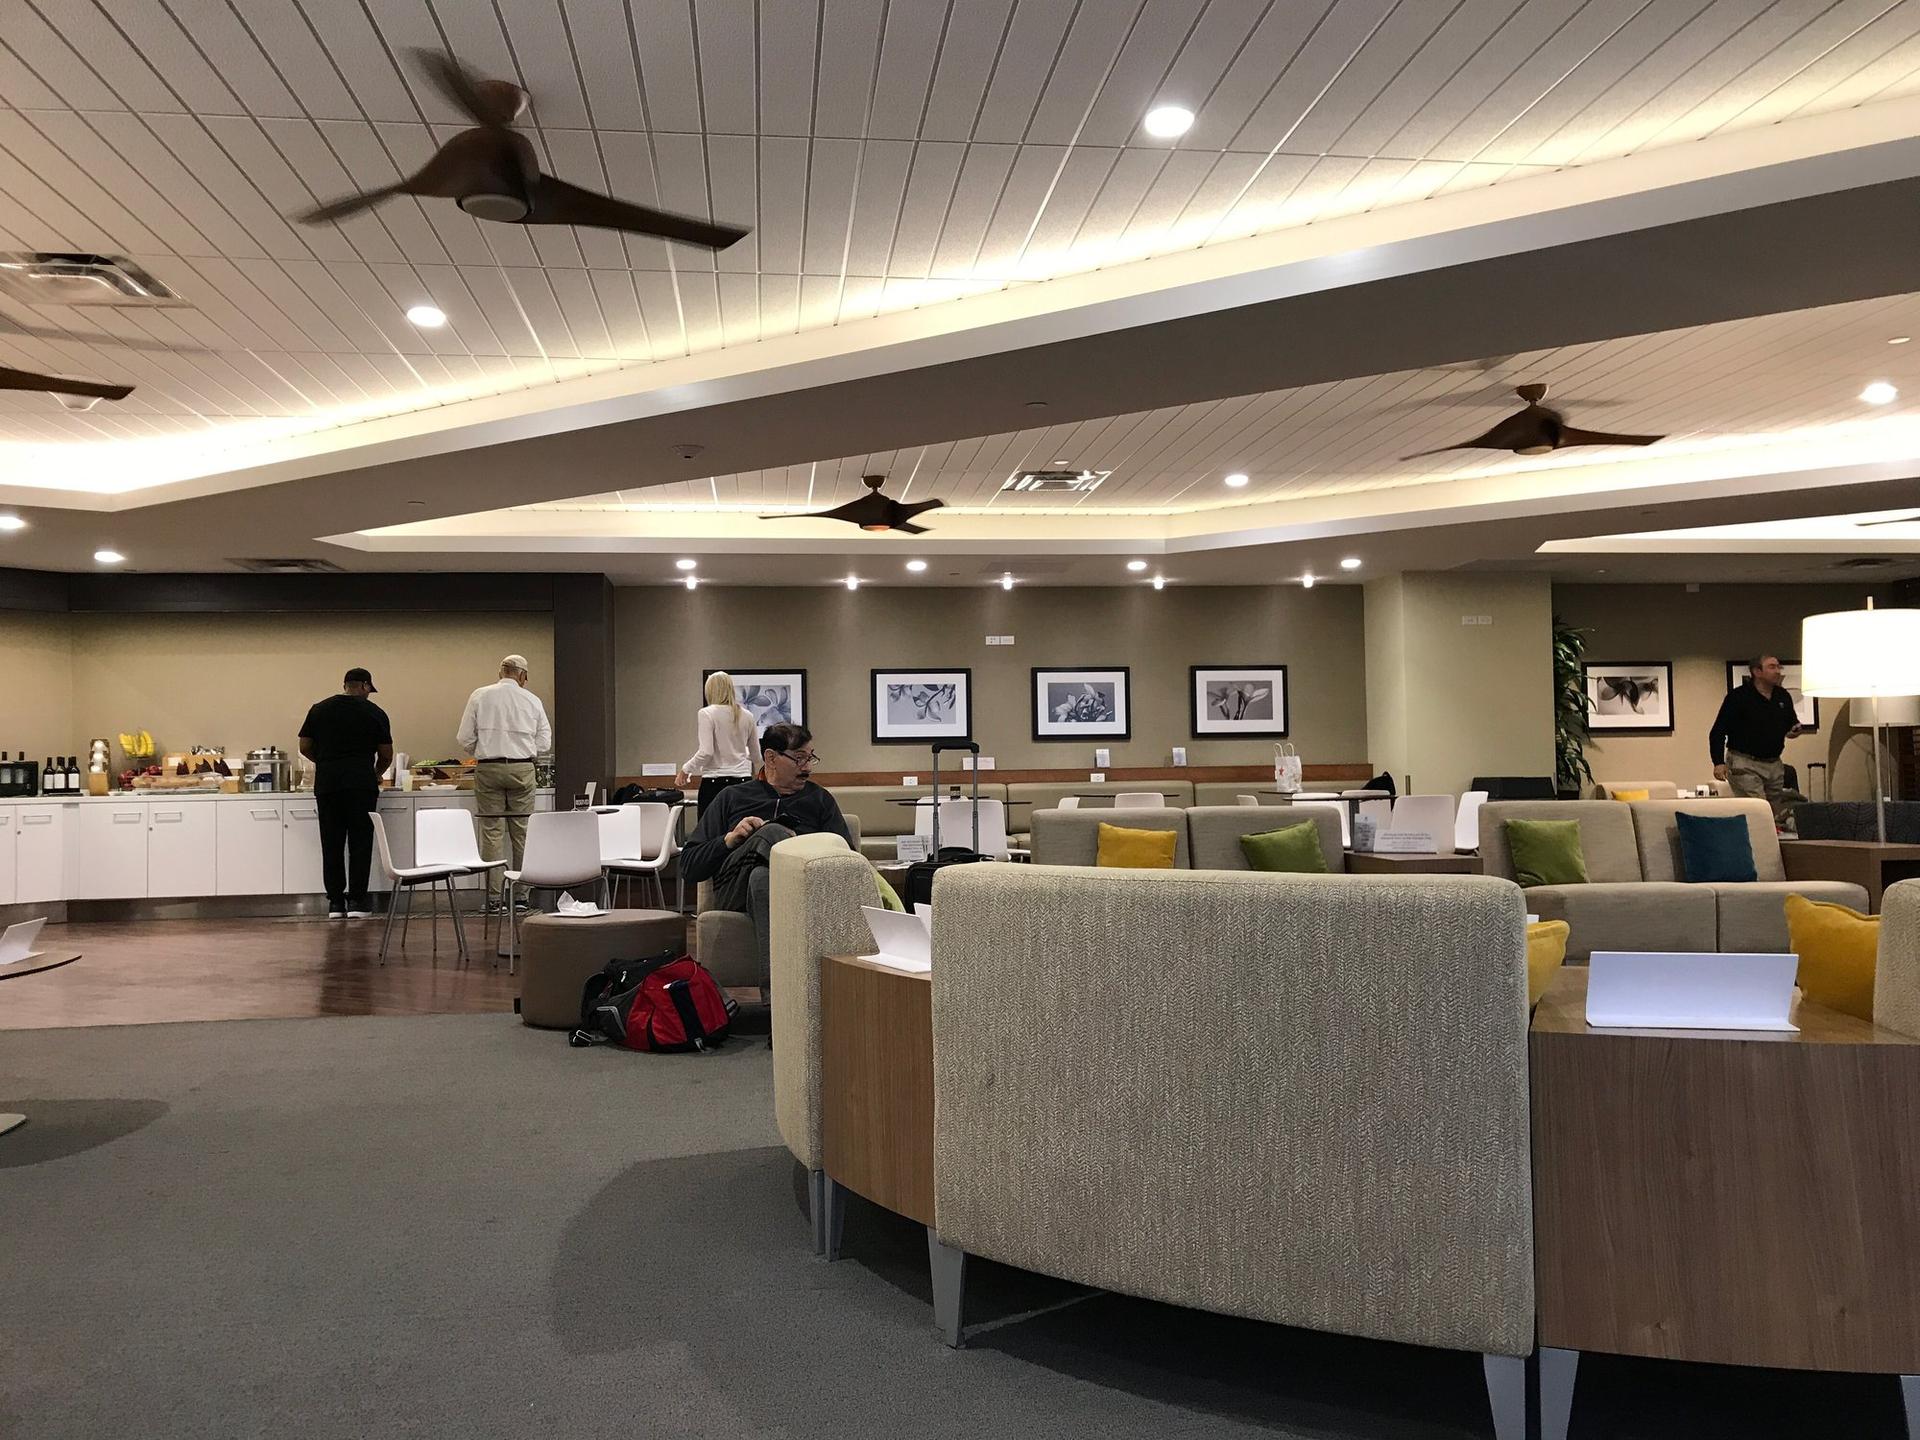 Hawaiian Airlines The Plumeria Lounge image 29 of 41